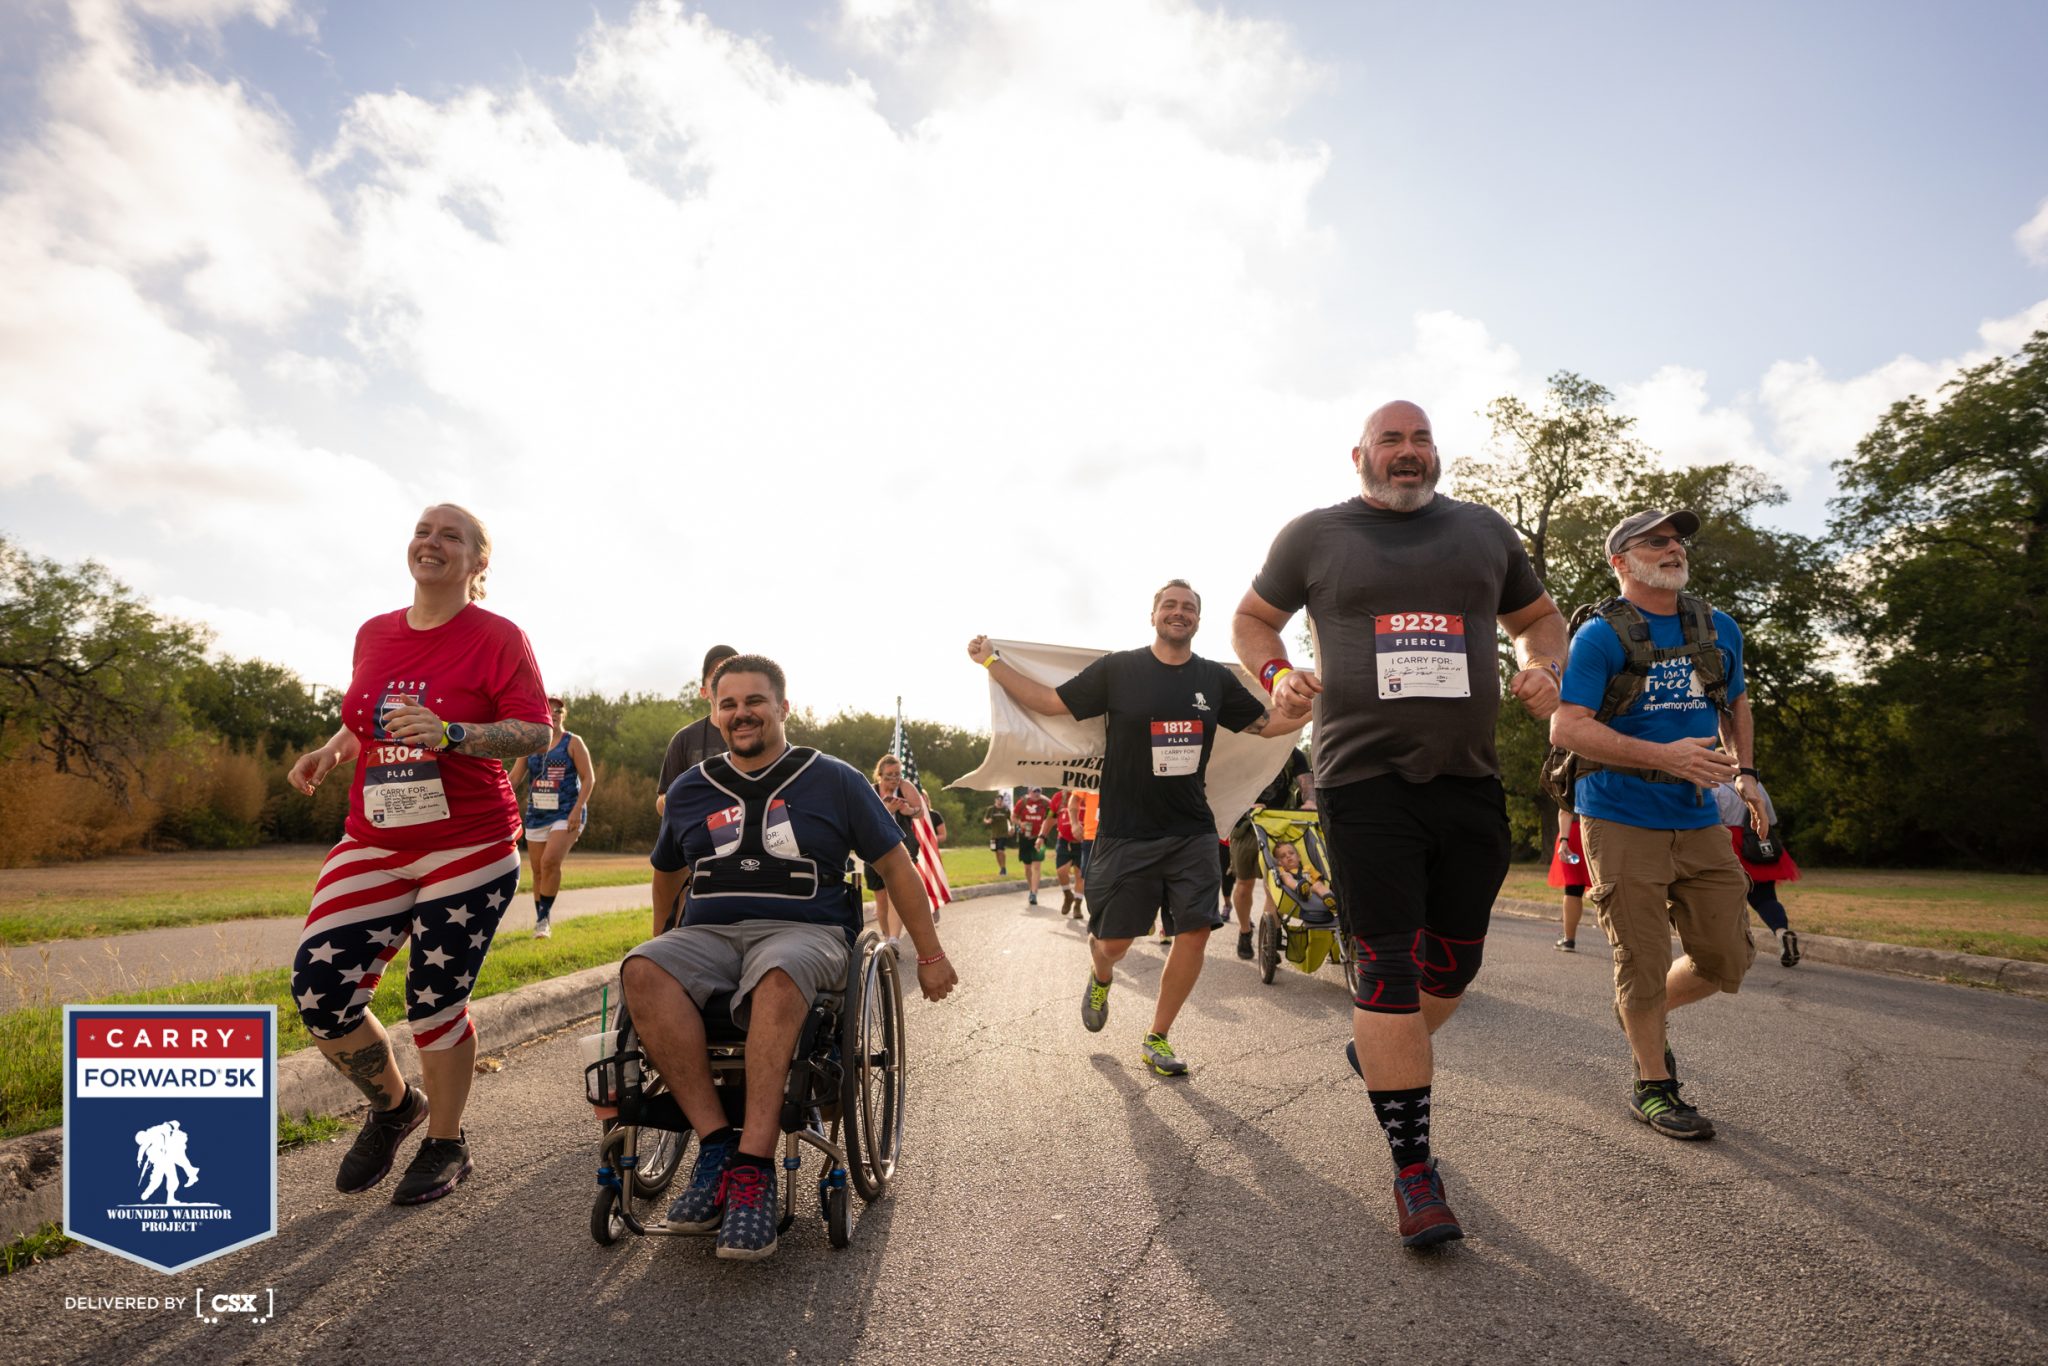 Join Wounded Warrior Project Carry Forward 5K in San Antonio